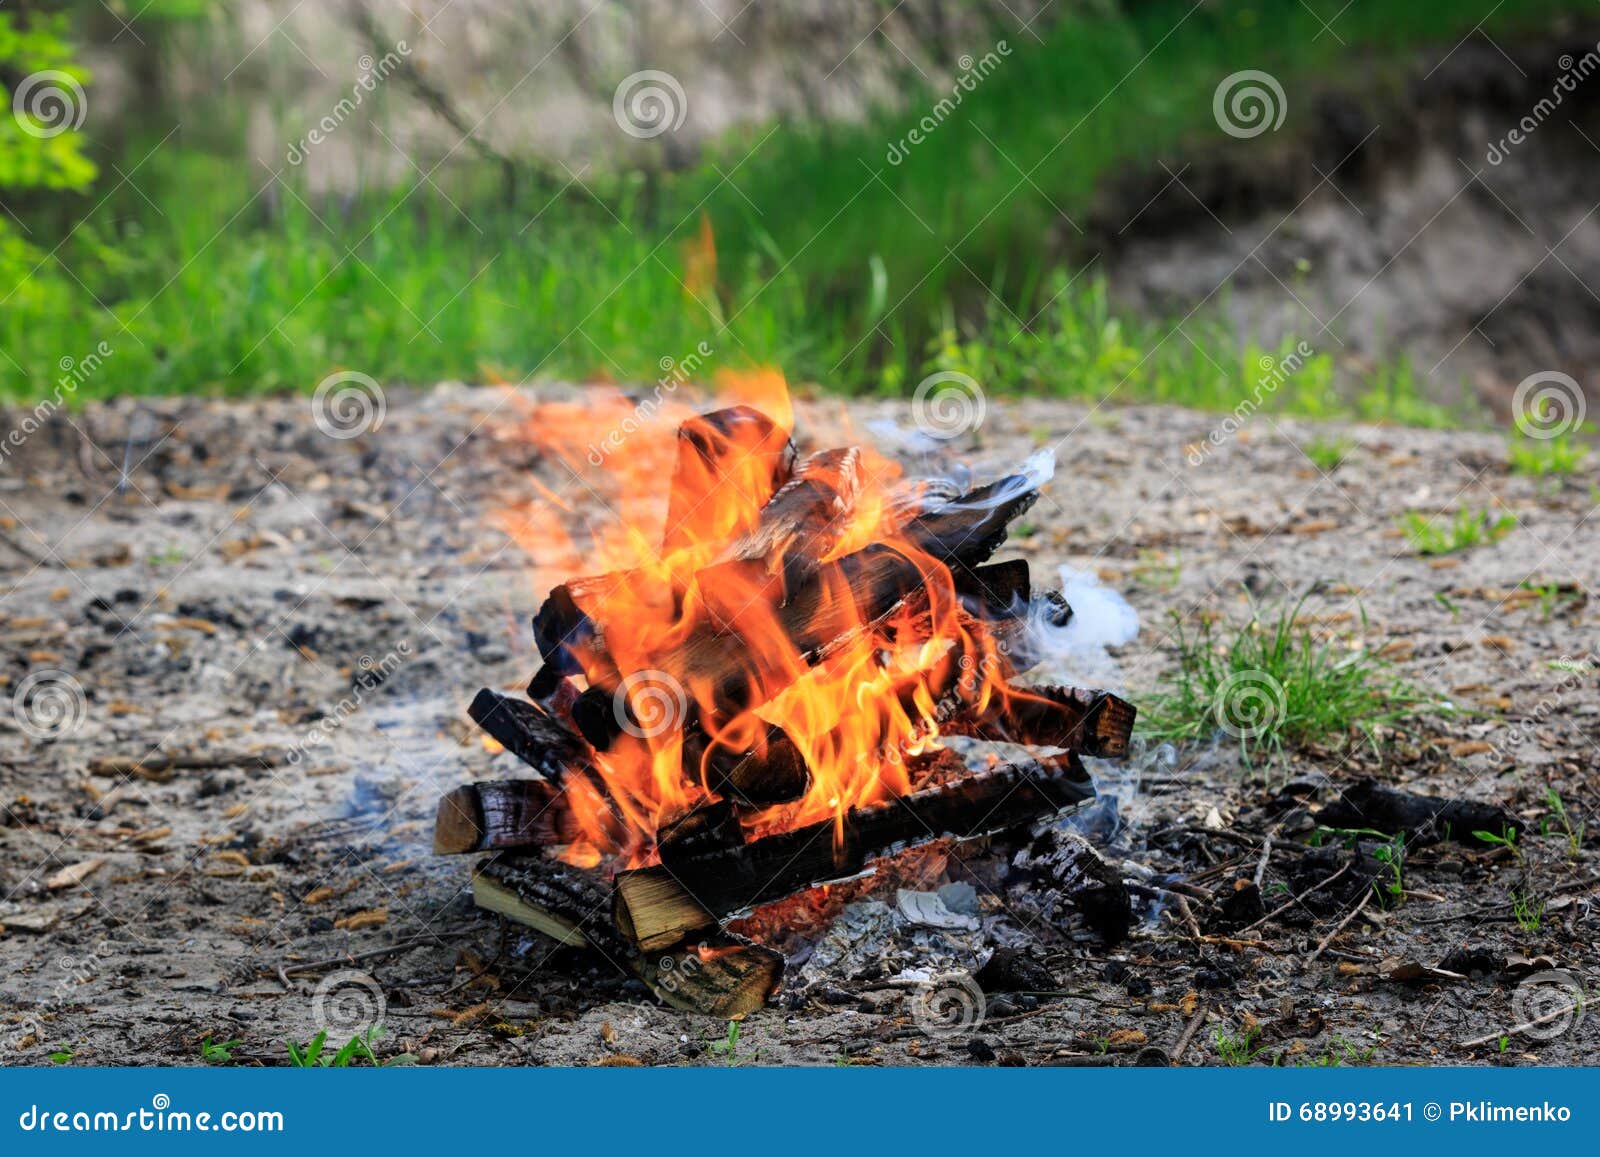 Campfire on Meadow in Green Forest Stock Image - Image of coal, light ...